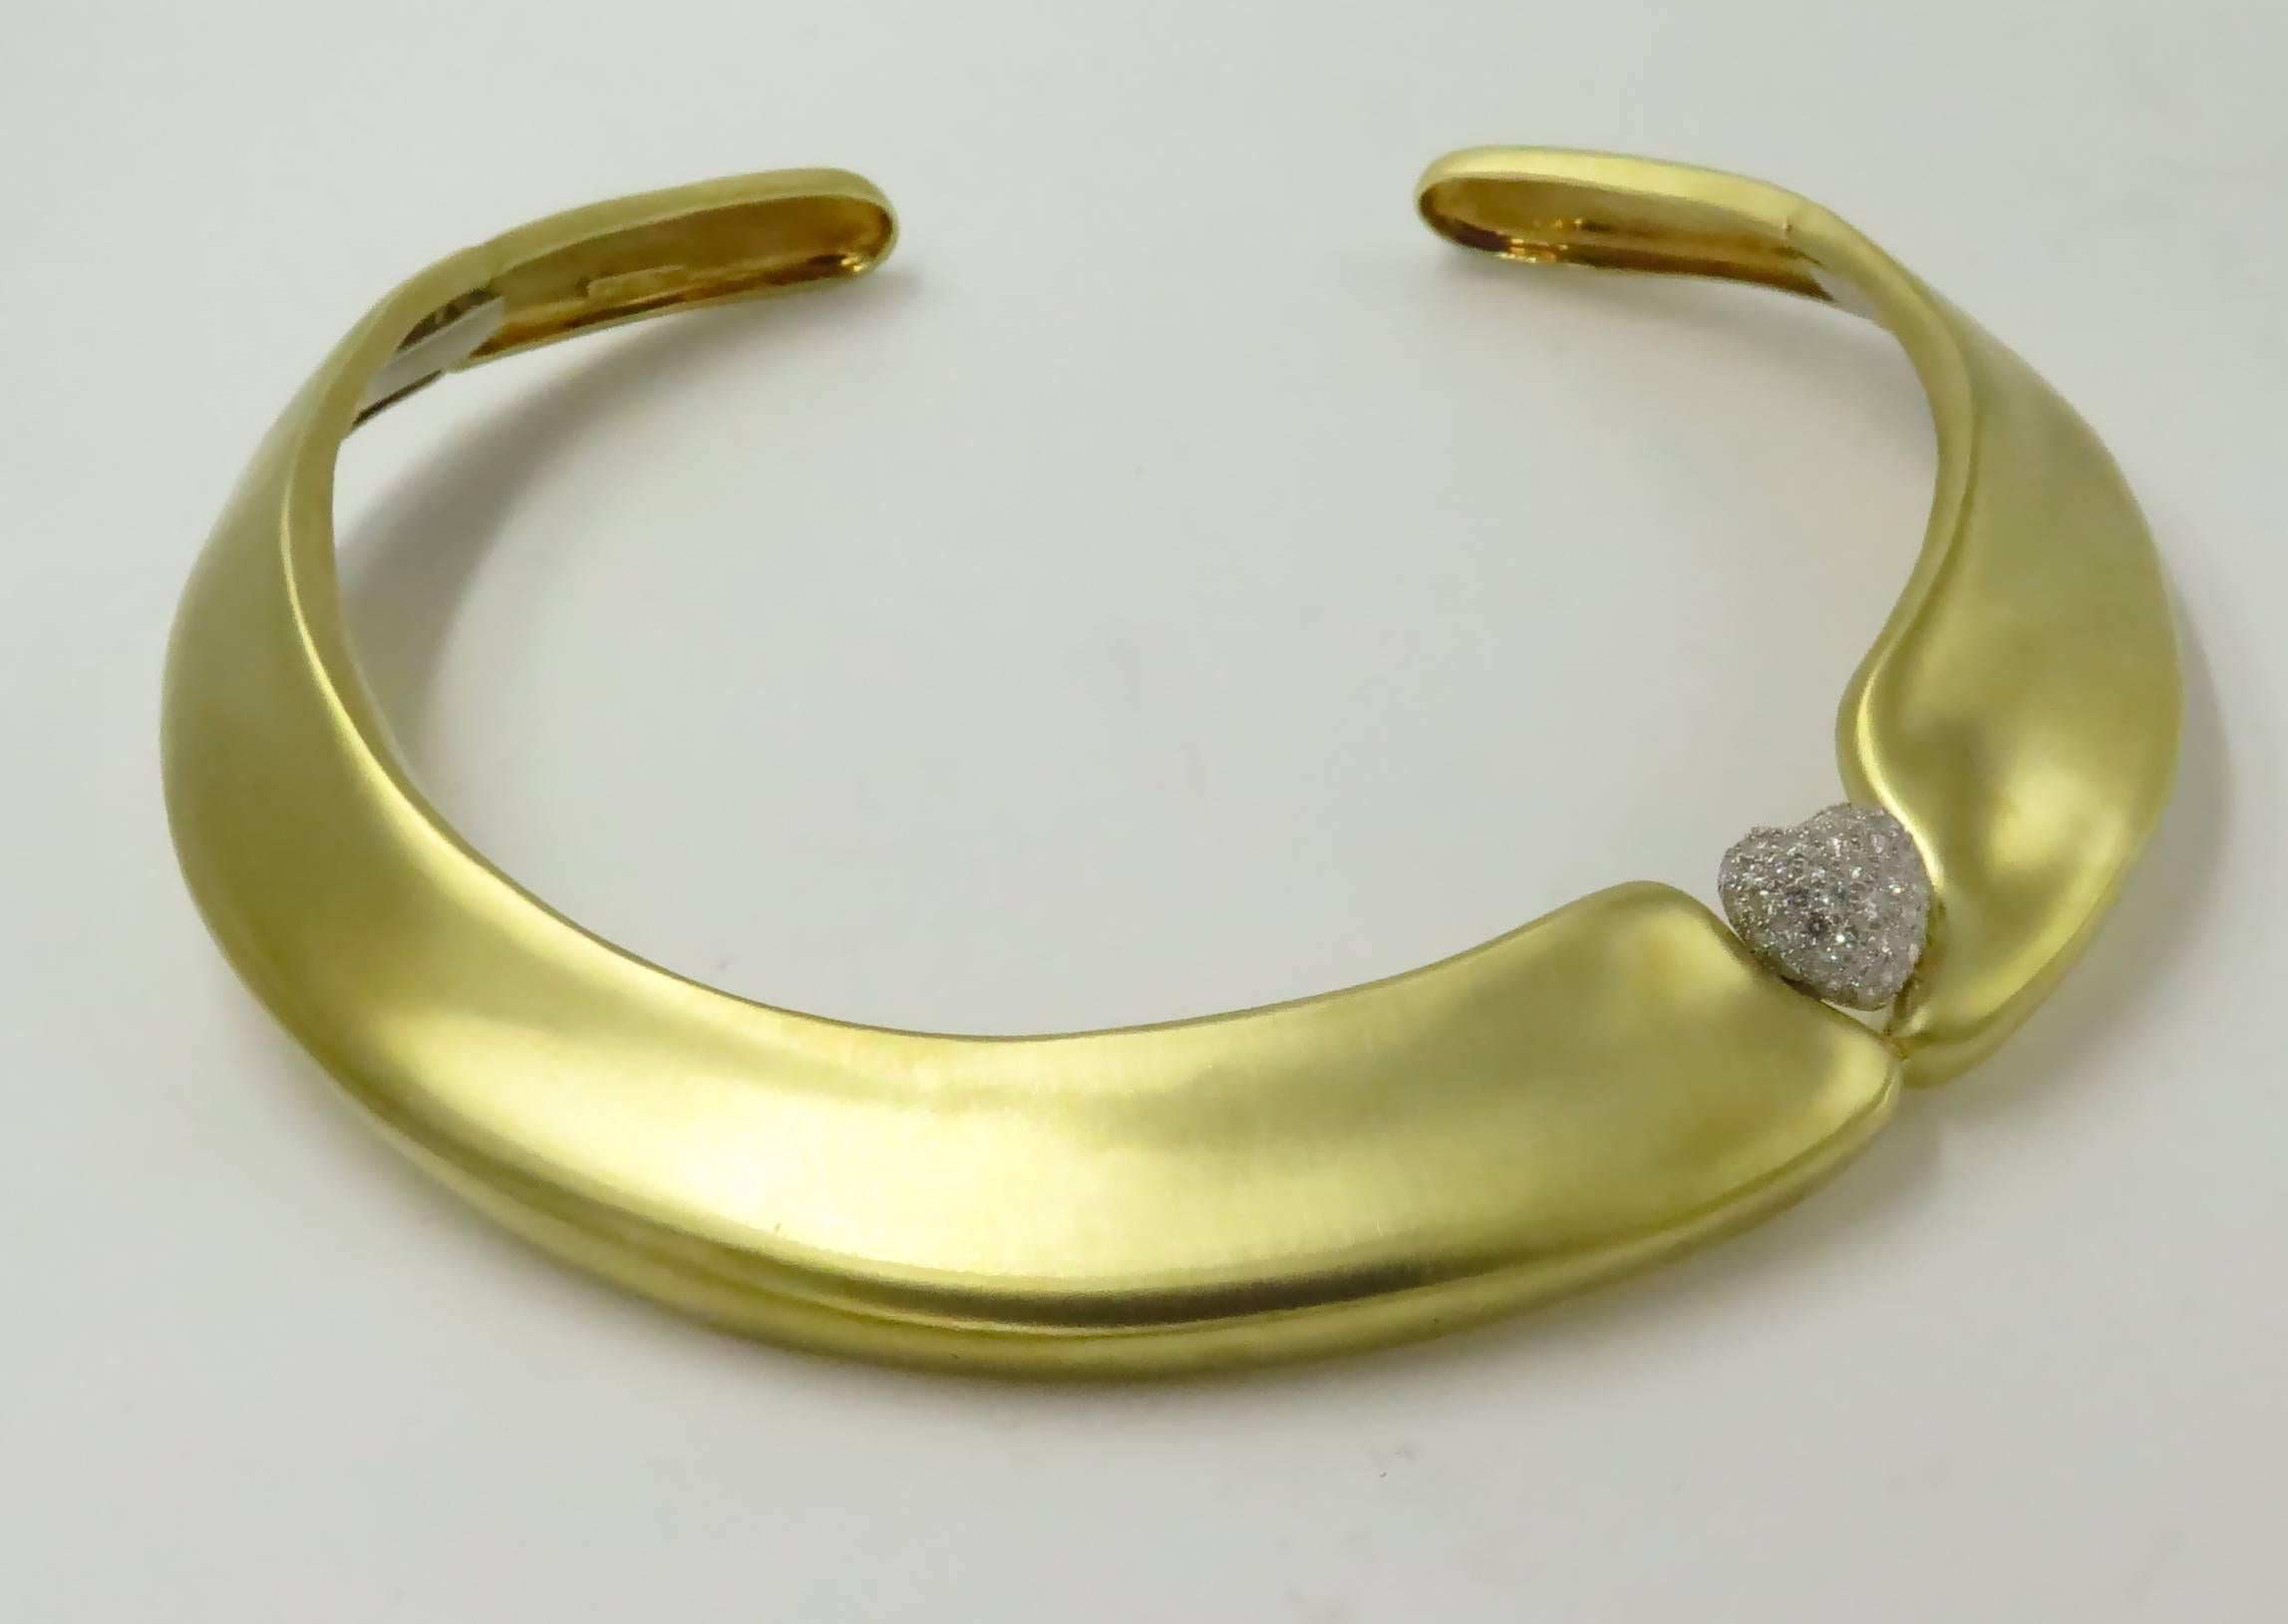 A Marlene Stowe 18 karat yellow gold, platinum and diamond necklace, circa 2000.  Signed M Stowe 18K PLAT.  The acid-finished yellow gold choker is of tapering form from 1/2 inch wide at the back to 7/8 inch wide at the front, with an offset